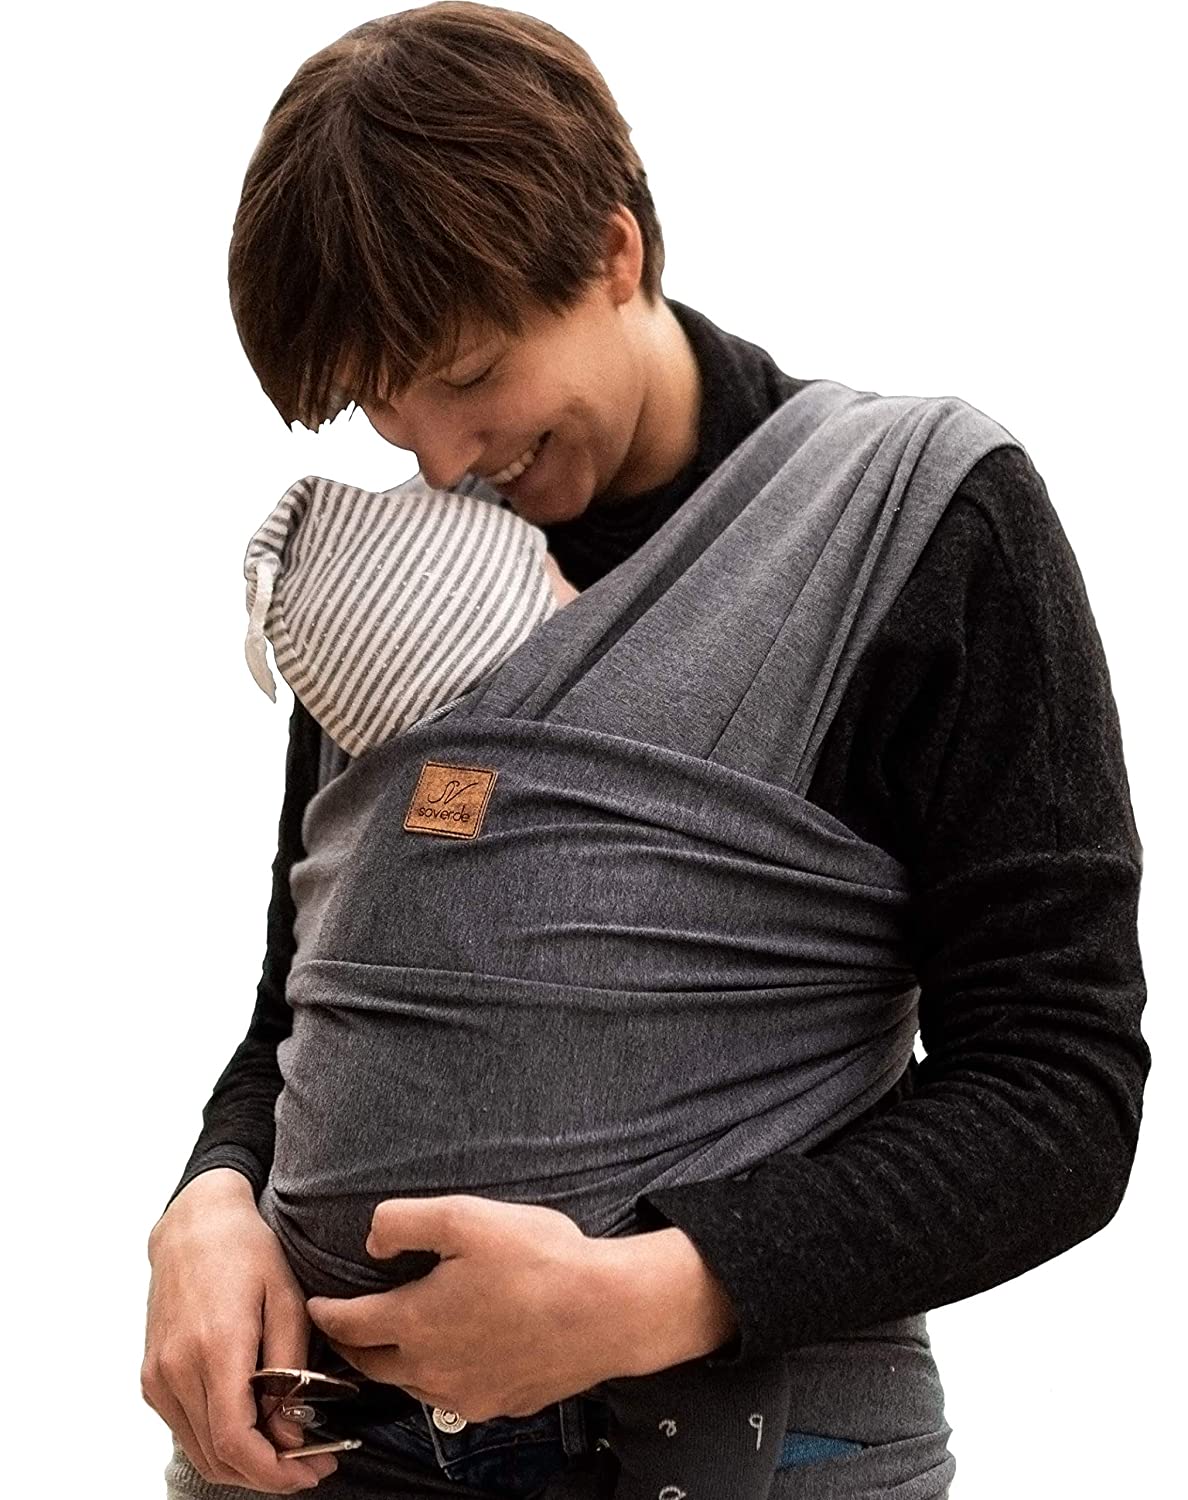 SoVerde Baby Sling - Long Elastic 540 cm Baby Sling for Mum and Dad -Carrying Instructions in German - For Premature and Newborn Children